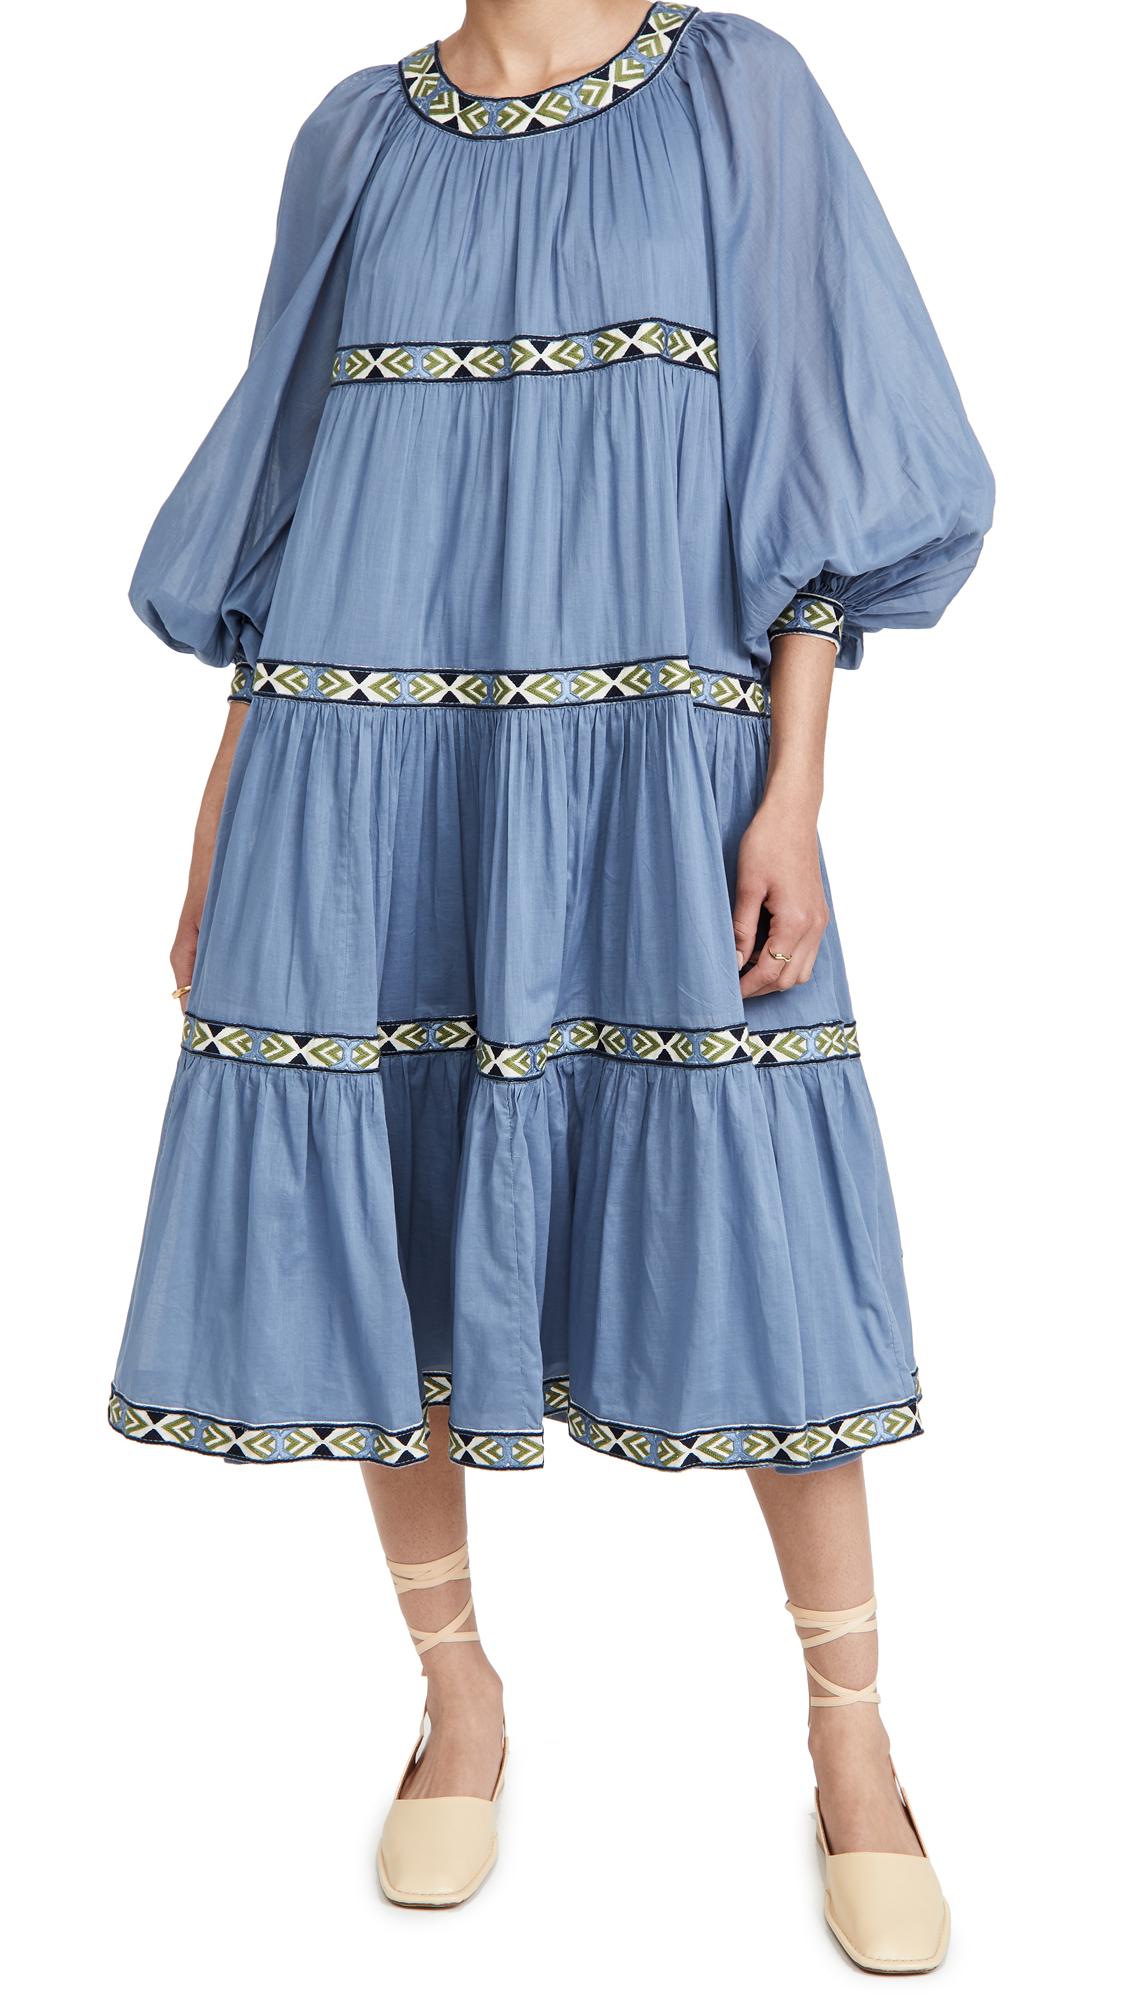 Tory Burch Cotton Balloon Dress in Blue - Save 17% - Lyst